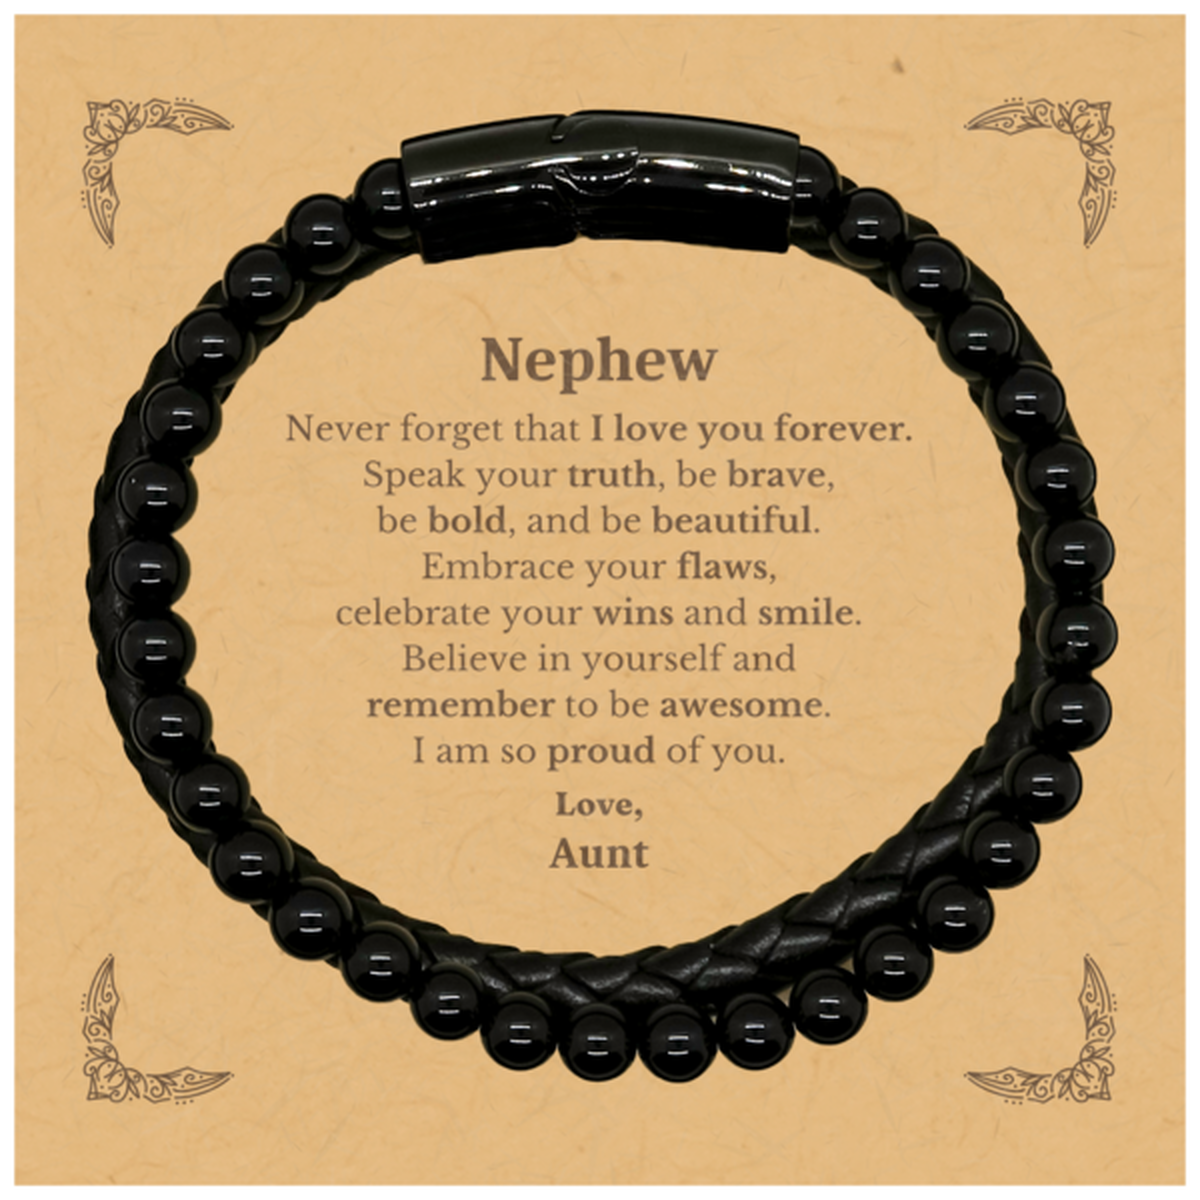 Nephew Stone Leather Bracelets, Never forget that I love you forever, Inspirational Nephew Birthday Unique Gifts From Aunt